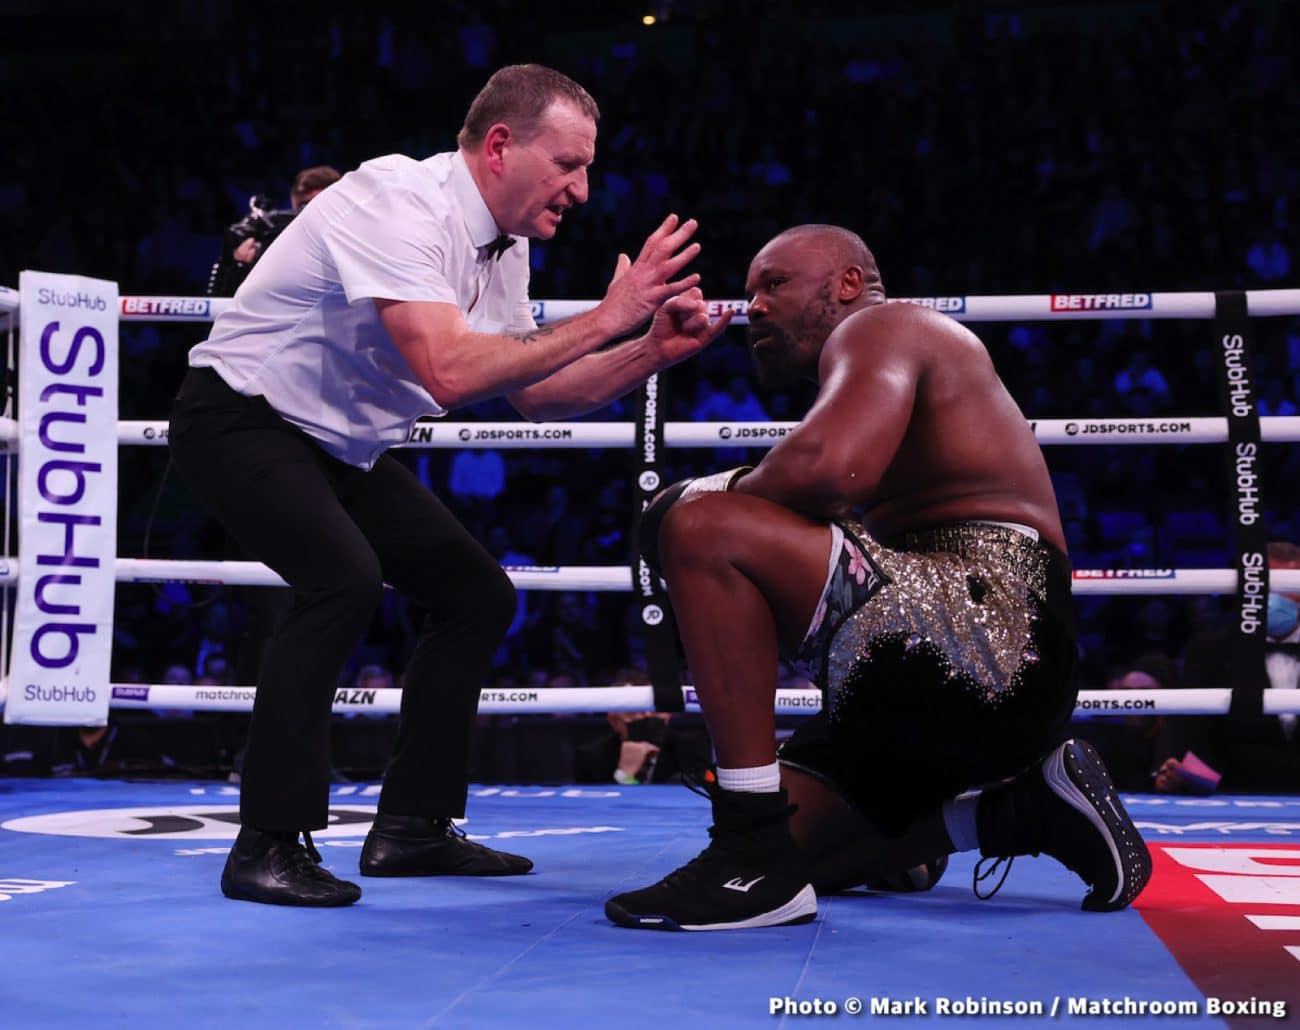 Image: Dereck Chisora looking forward to 2022 says trainer Coldwell